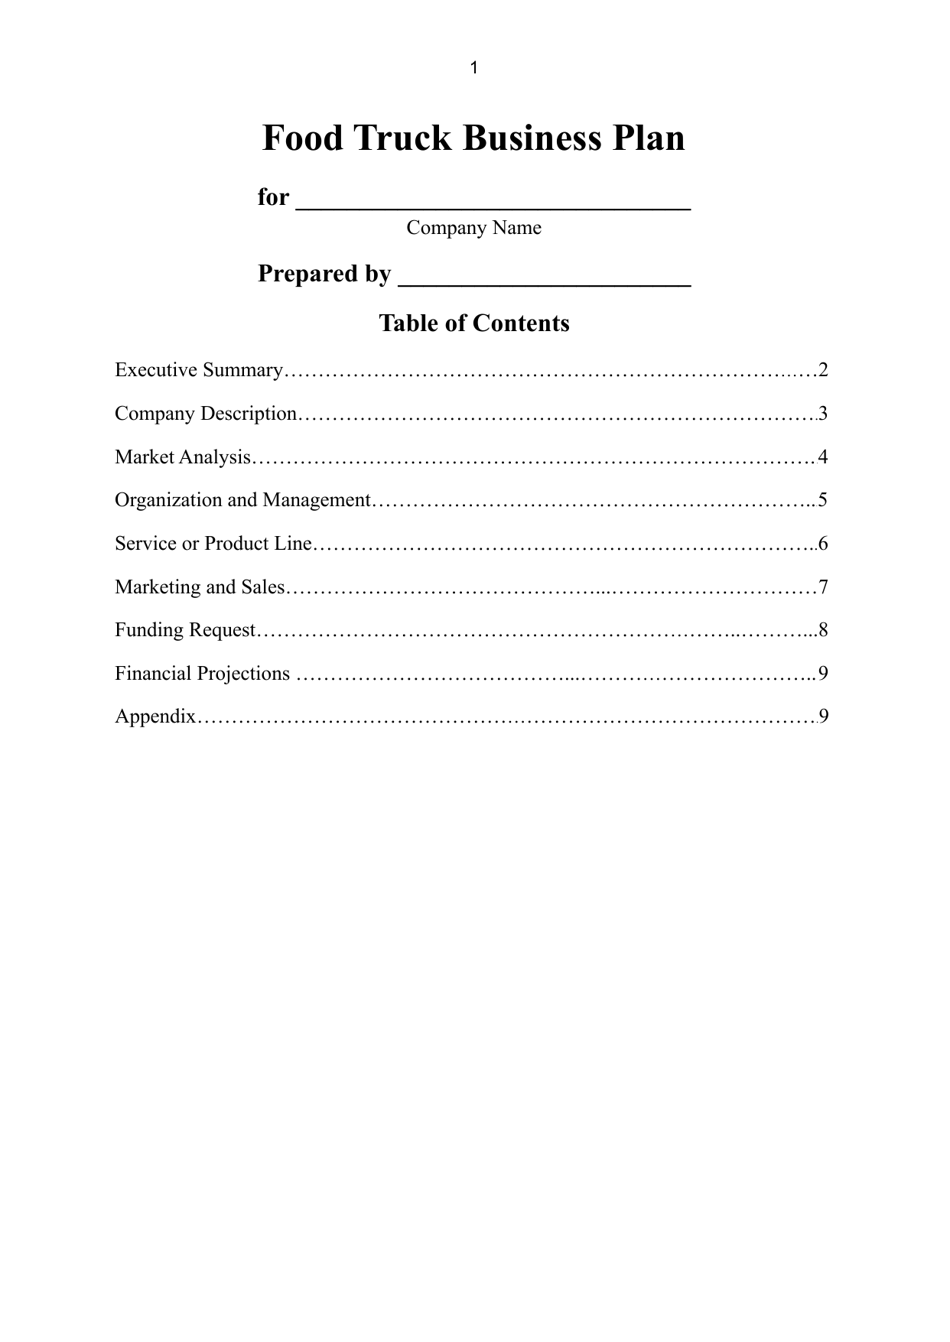 Food Truck Business Plan Template, Page 1